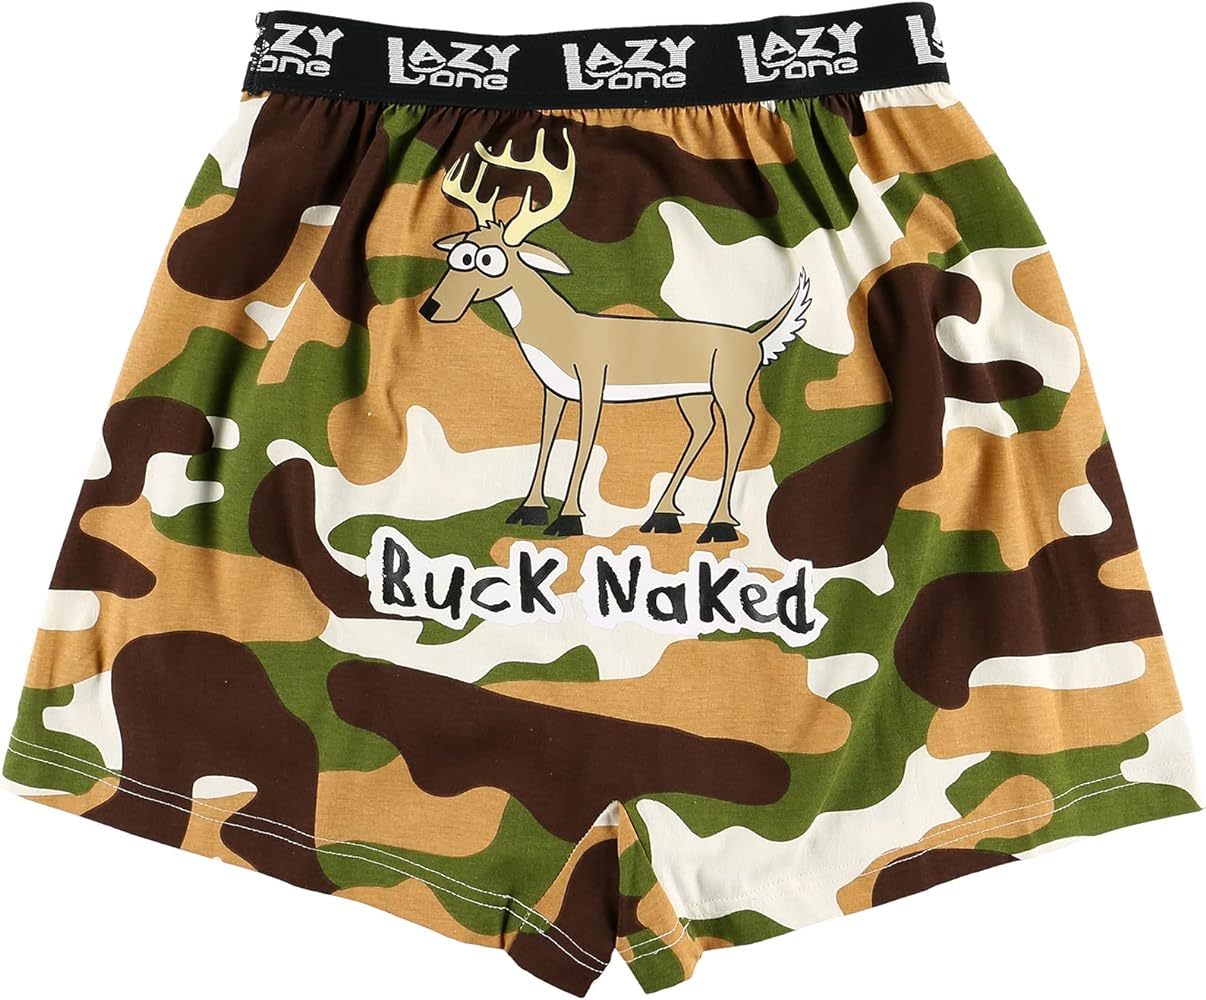 Lazy One Funny Animal Boxers, Humorous Underwear, Novelty Boxer Shorts, Gag Gifts for Men